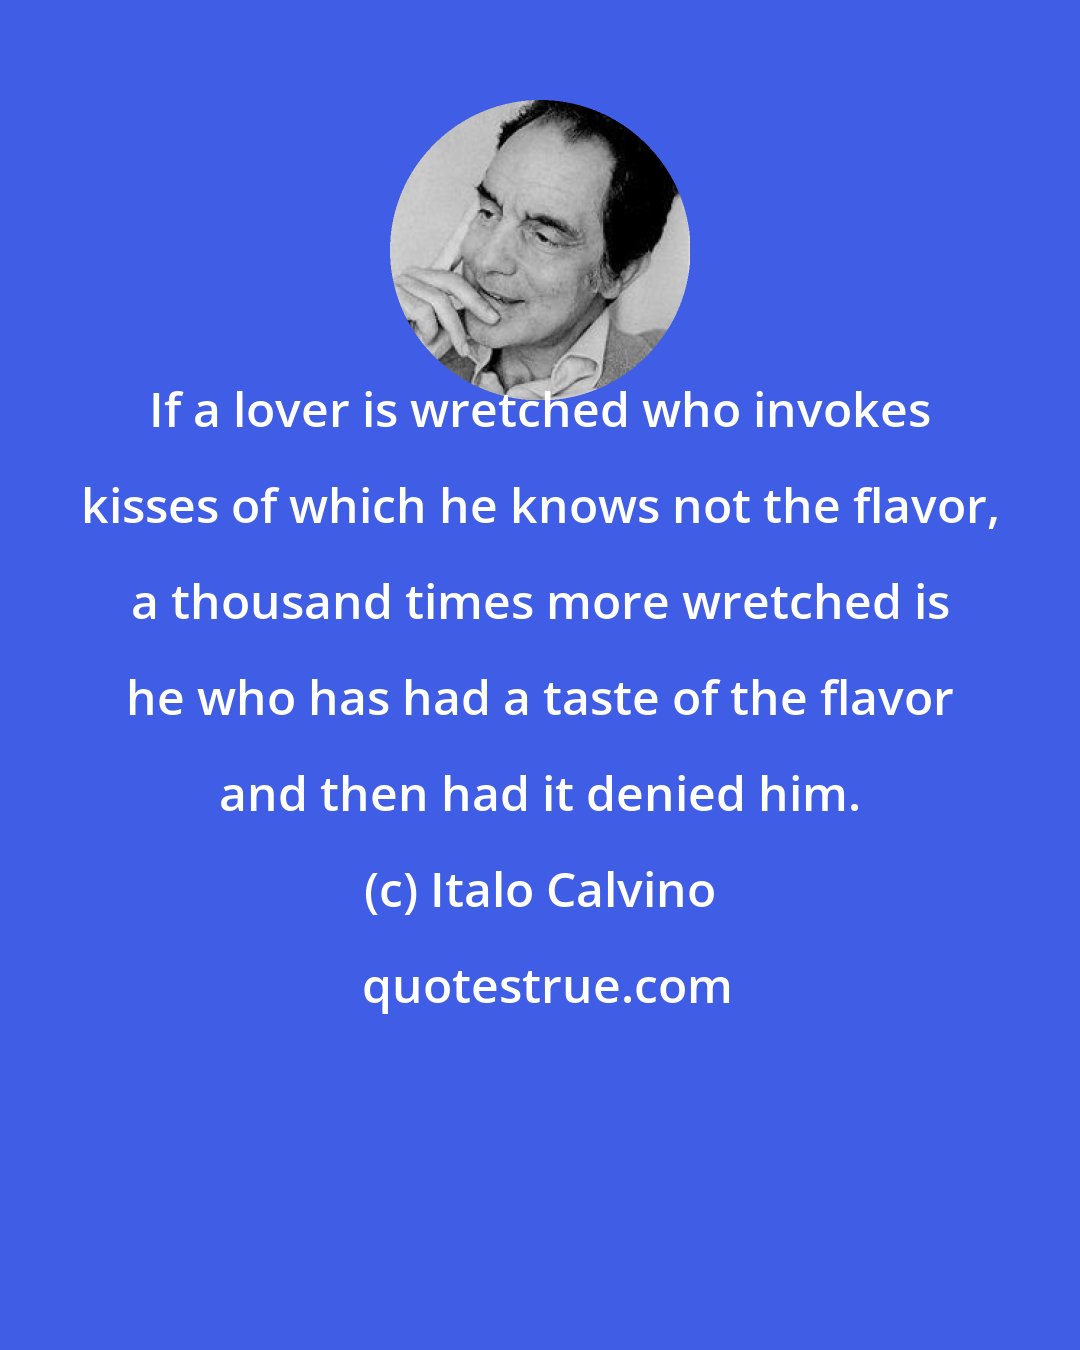 Italo Calvino: If a lover is wretched who invokes kisses of which he knows not the flavor, a thousand times more wretched is he who has had a taste of the flavor and then had it denied him.